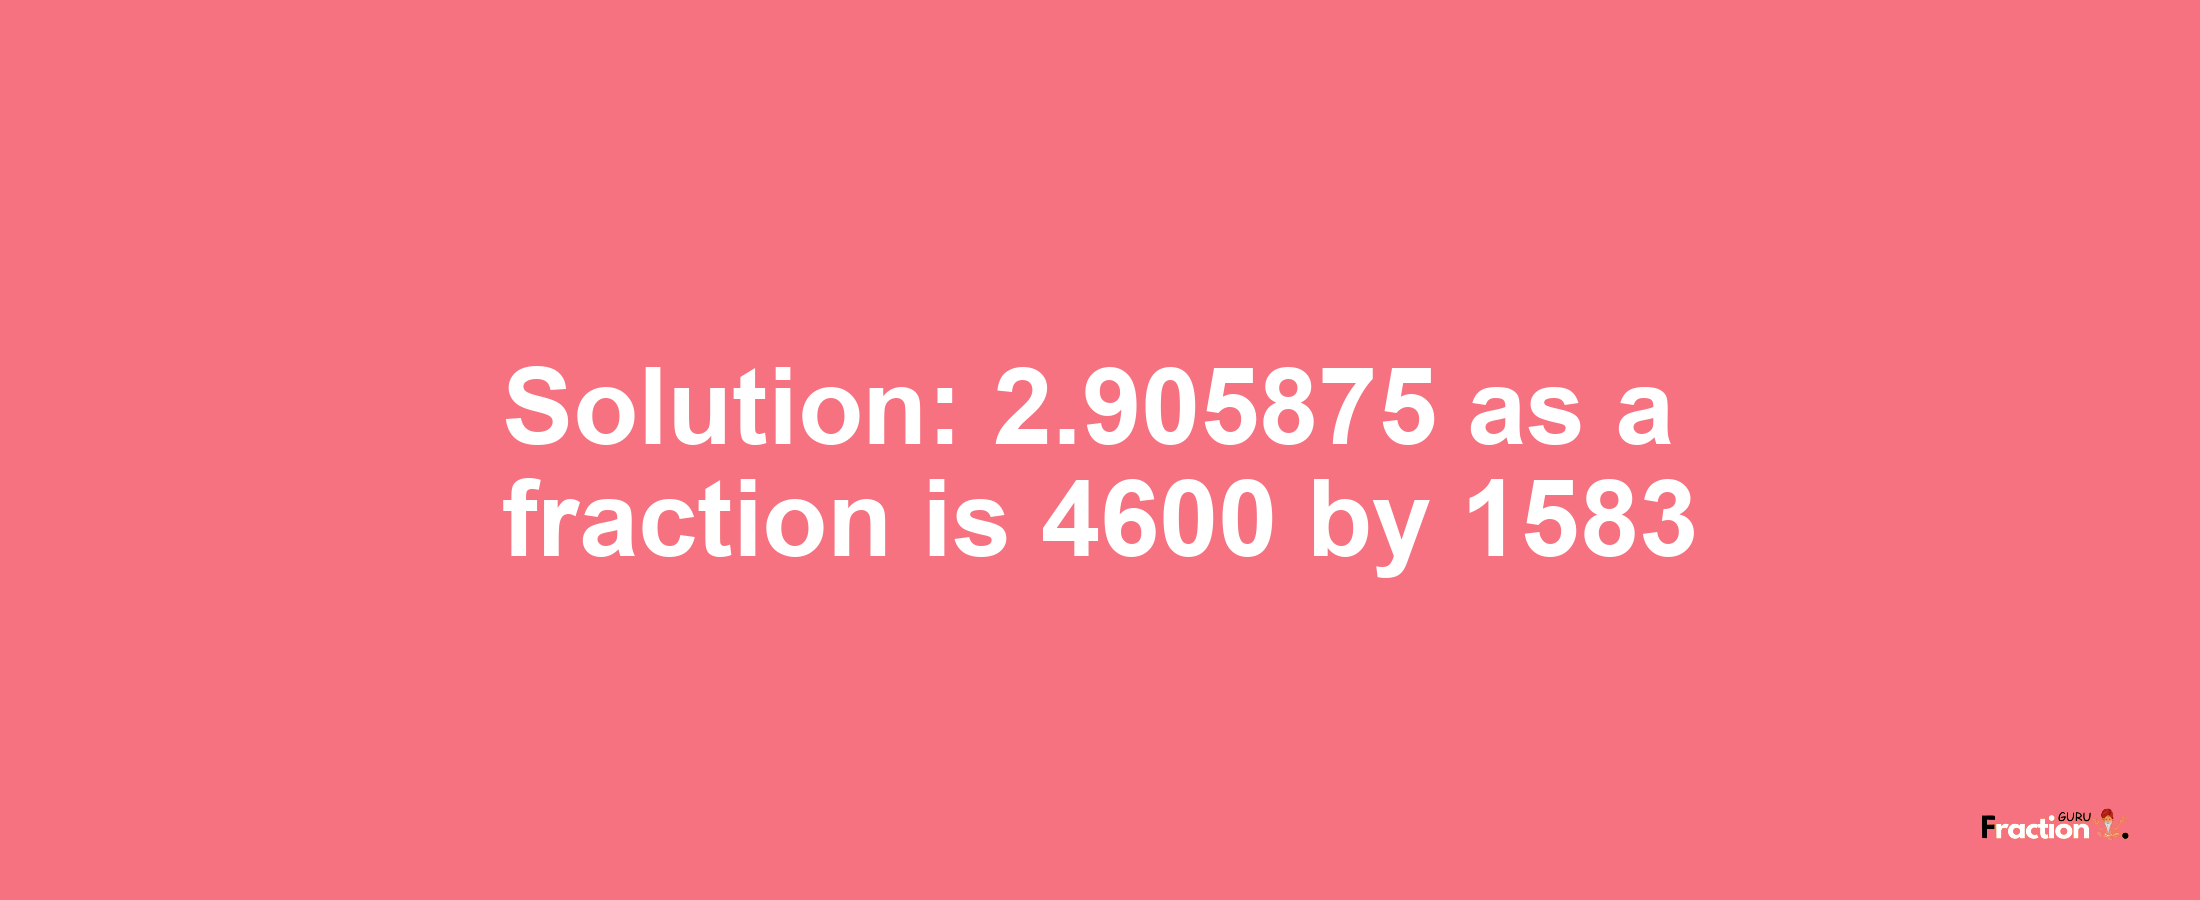 Solution:2.905875 as a fraction is 4600/1583